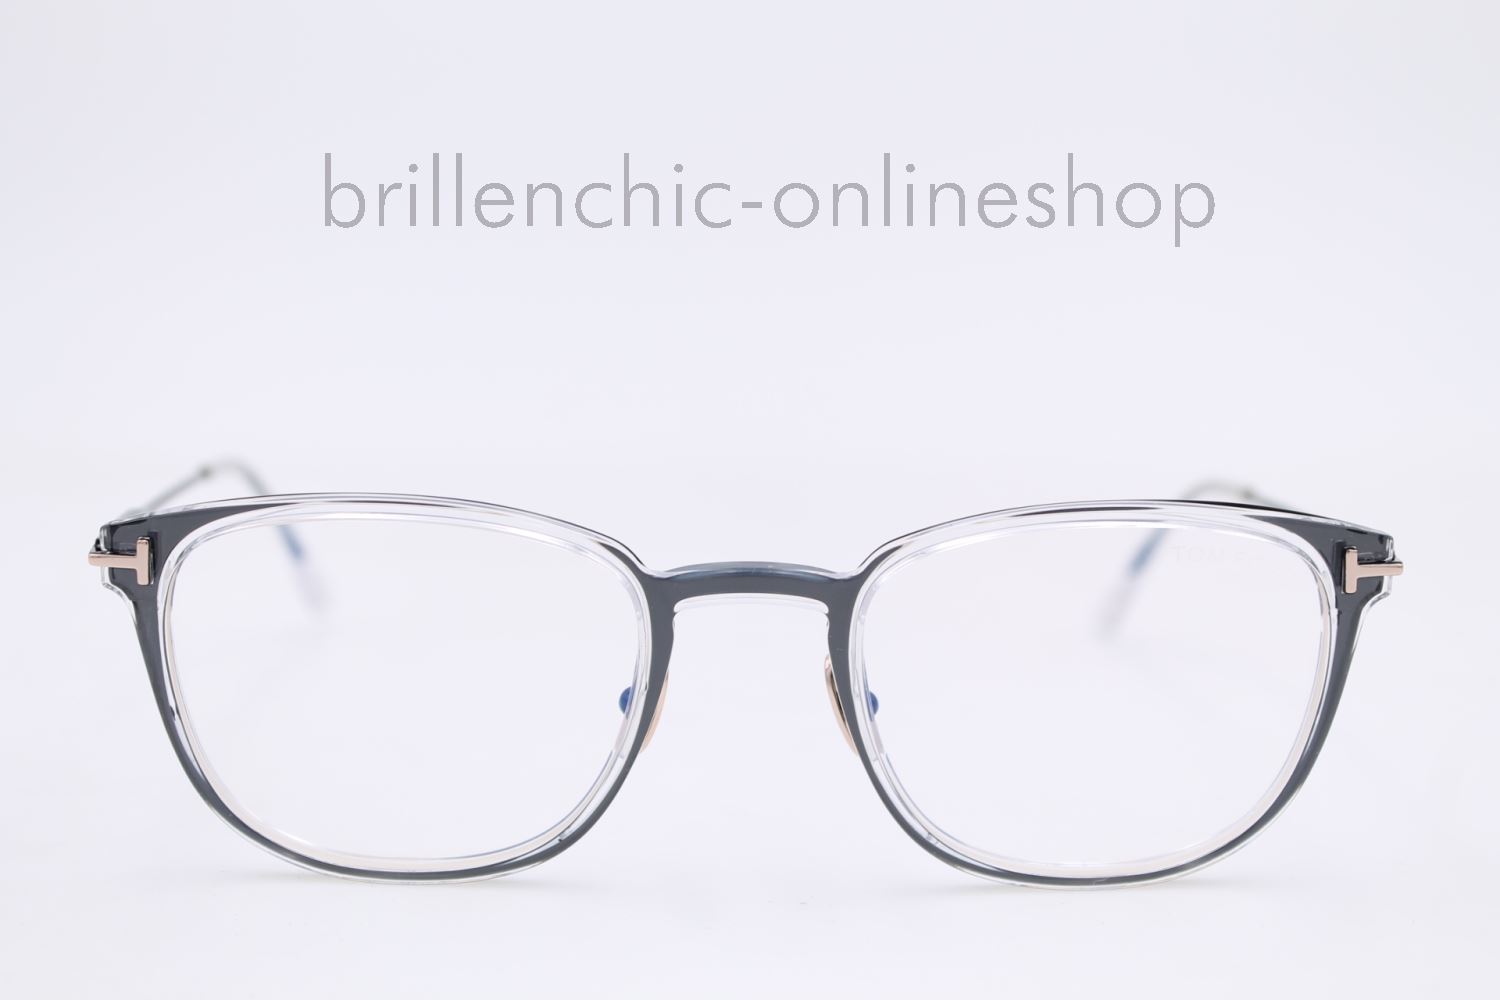 Brillenchic-onlineshop in Berlin - TOM FORD TF 5694-B 5694 001 NEW